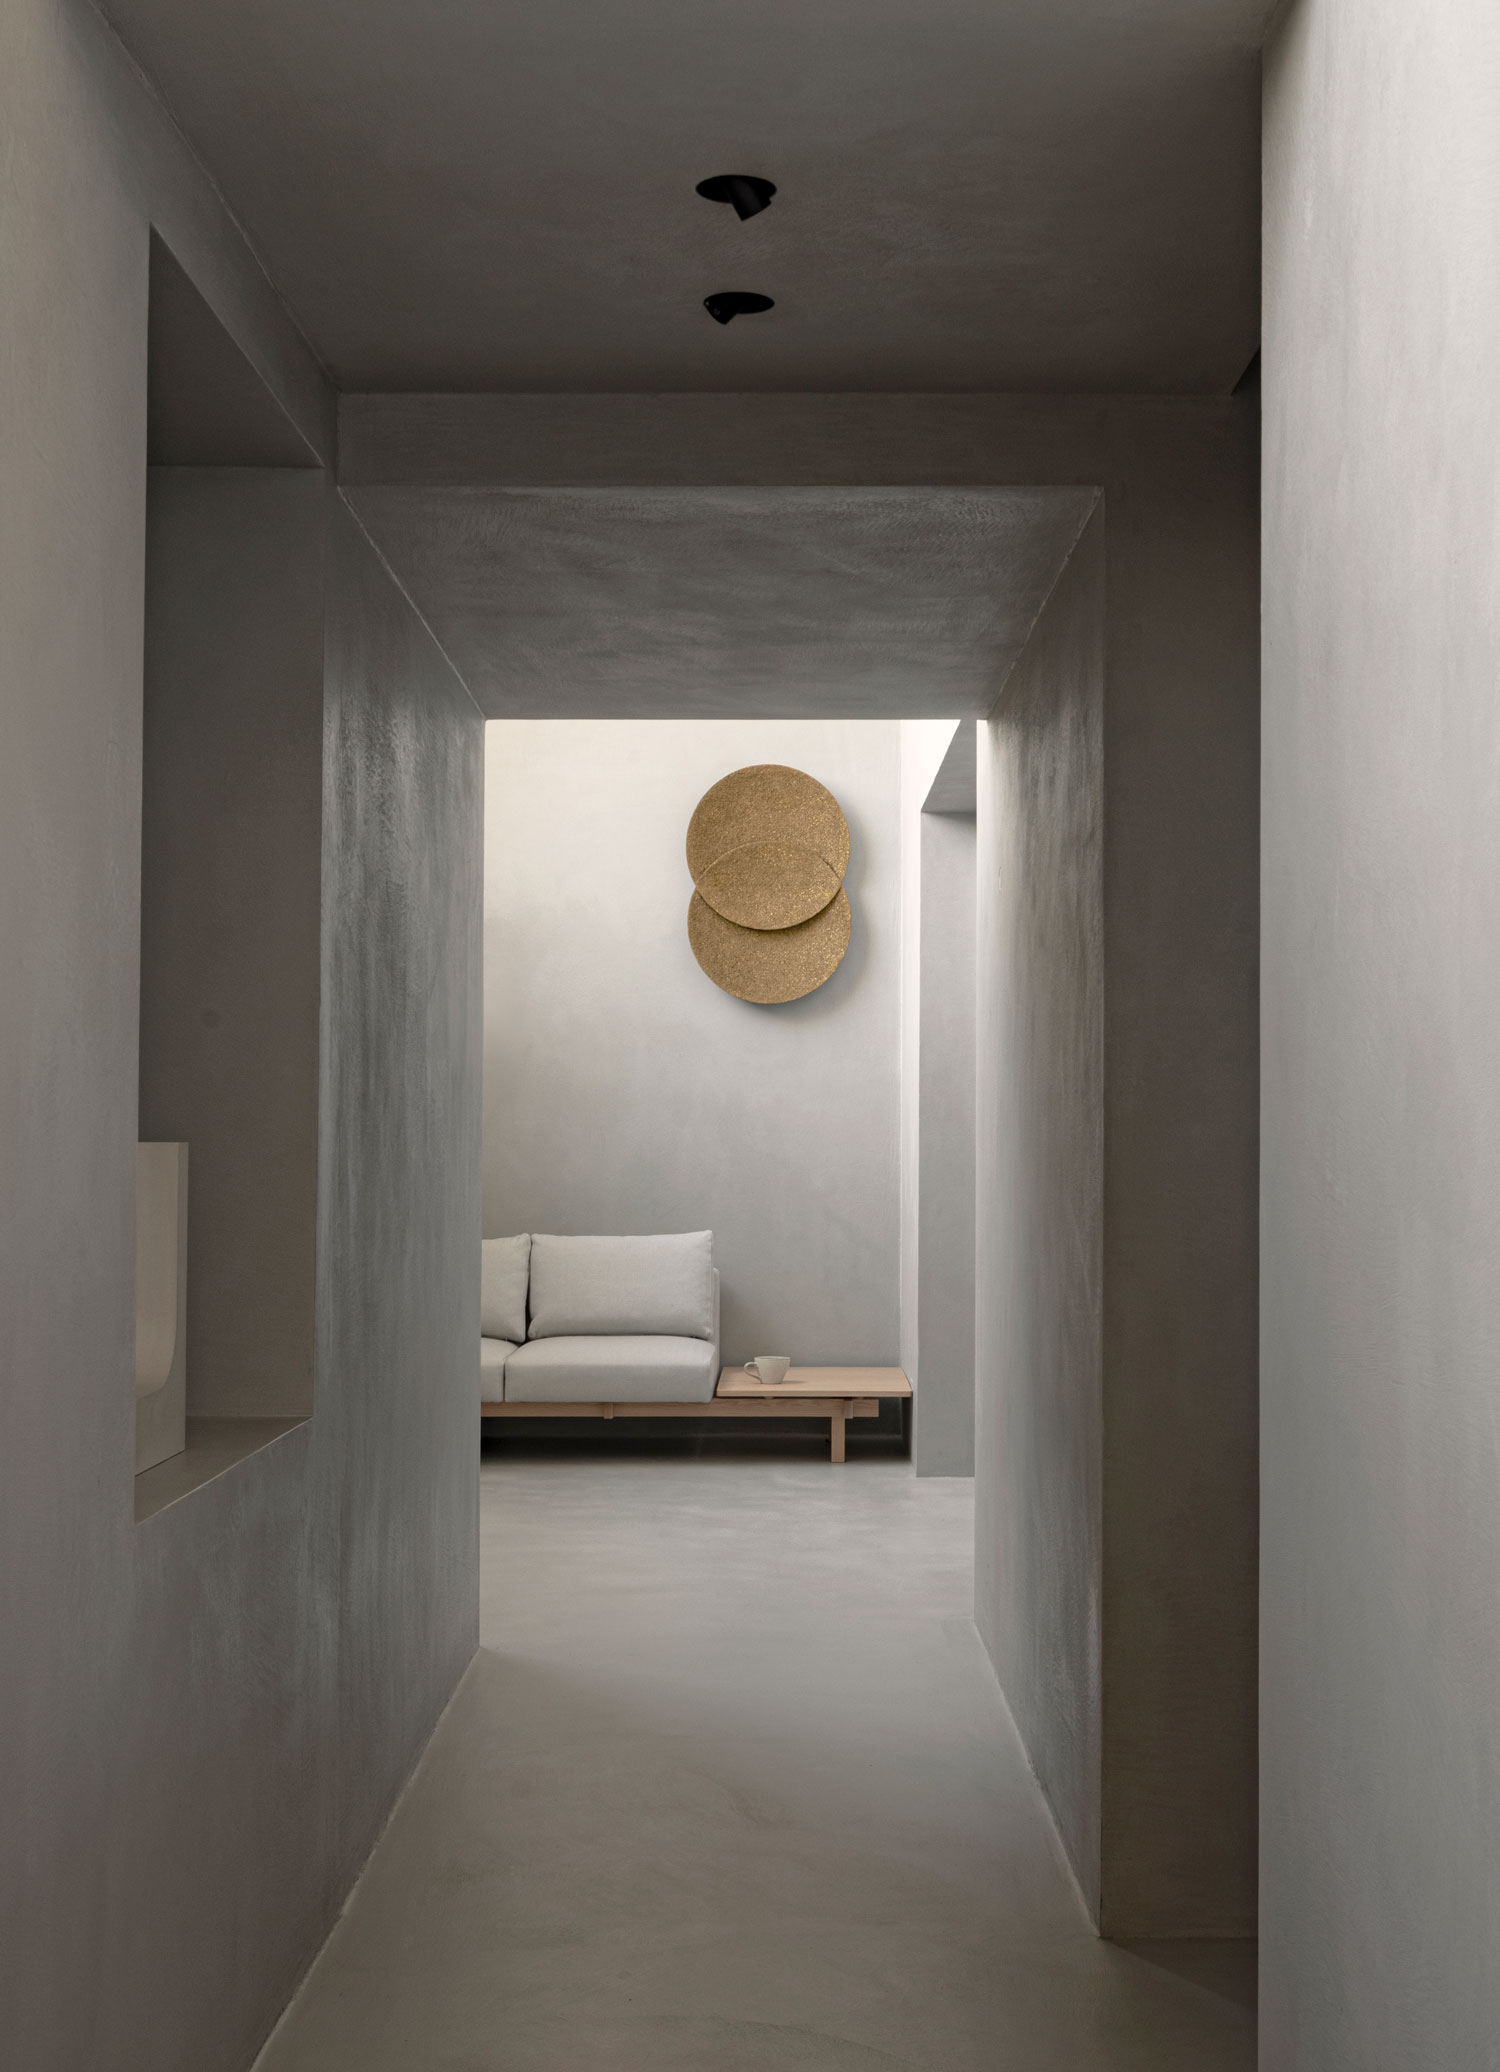 Soft Minimal ­ – A Sensory Approach to Architecture & Design